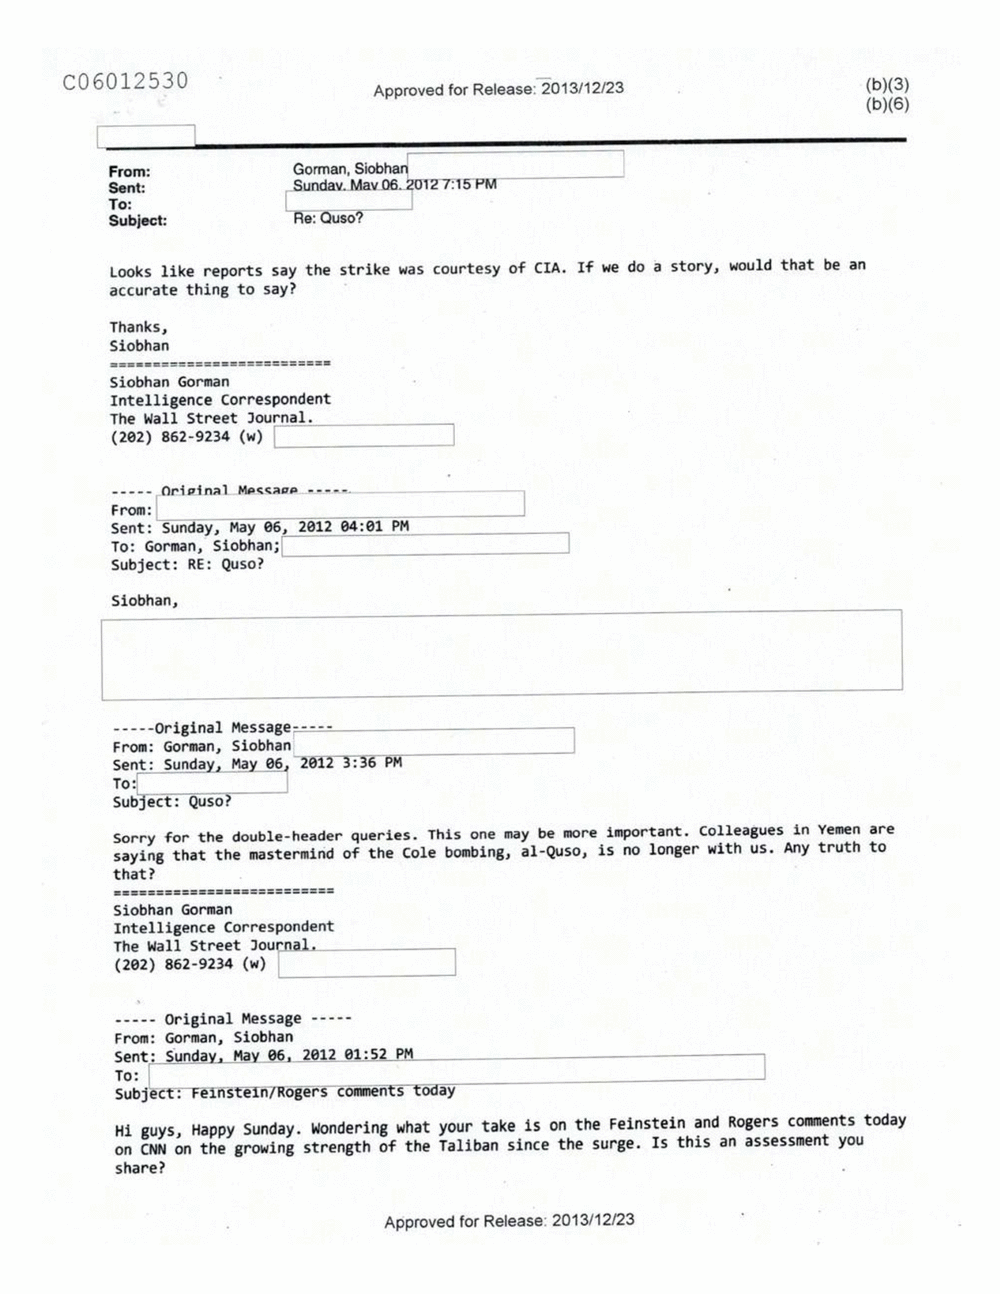 Page 59 from Email Correspondence Between Reporters and CIA Flacks